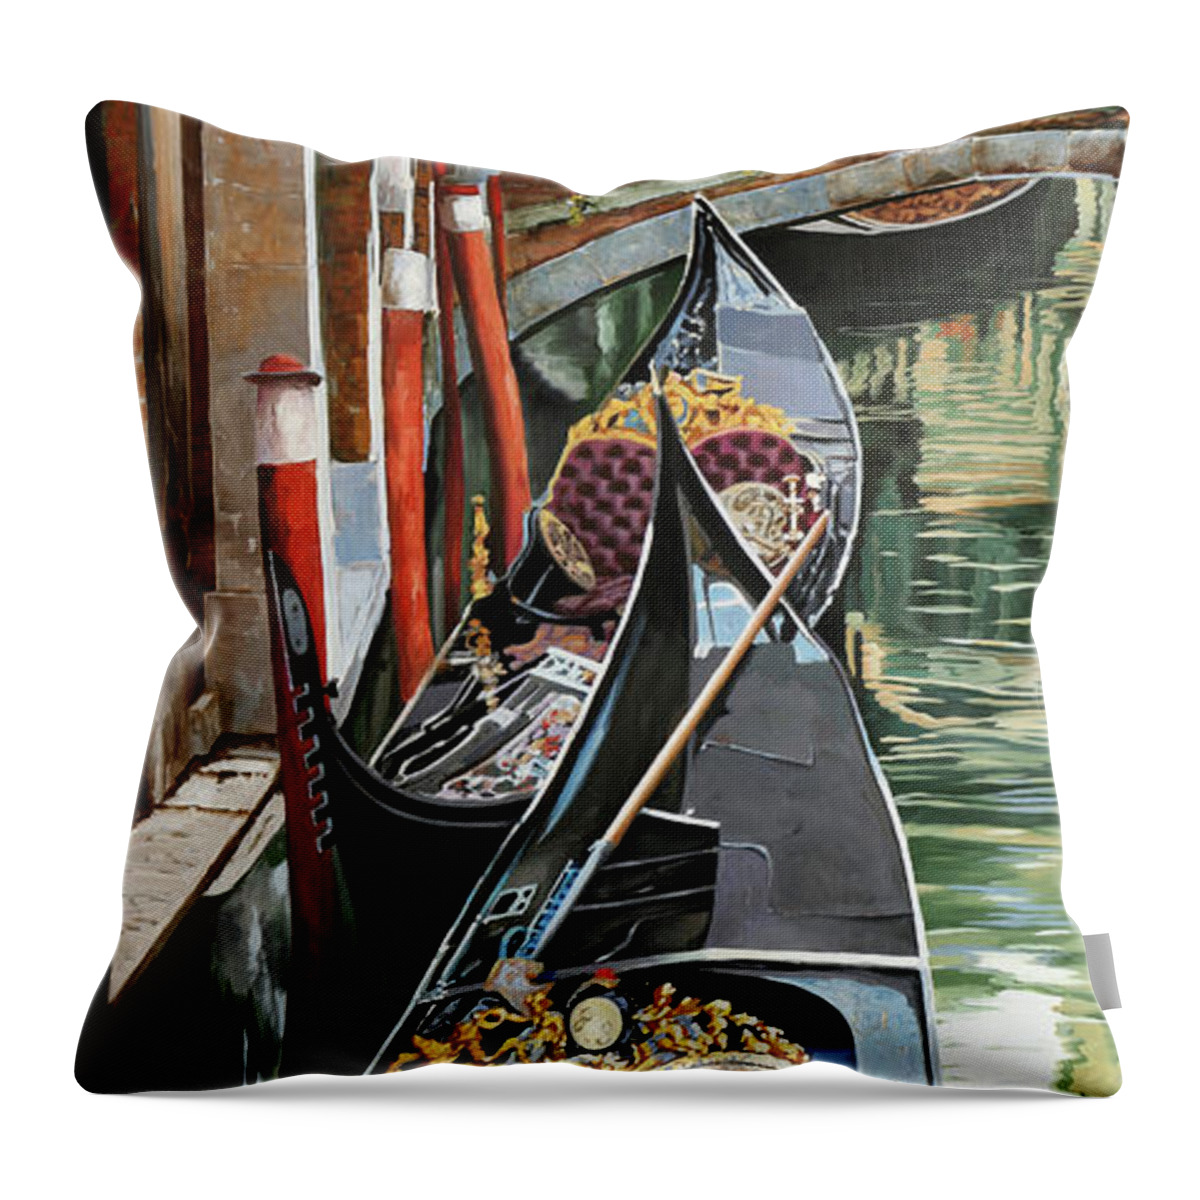 Gondola Throw Pillow featuring the painting Gondole Colorate by Guido Borelli